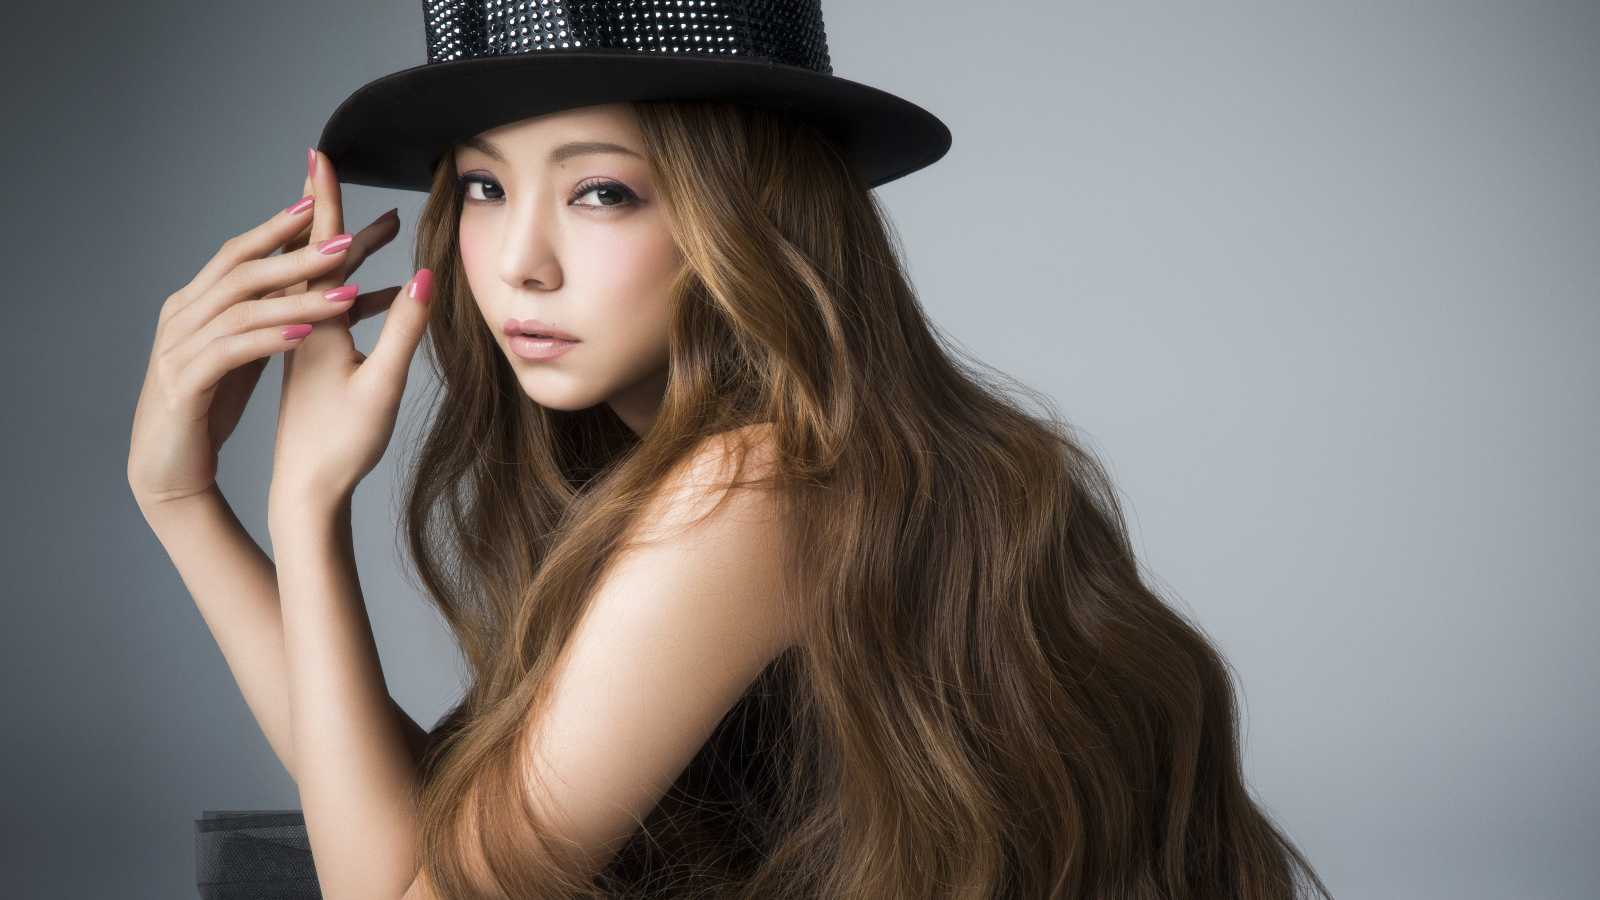 Amuro Namie - namie amuro LIVE STYLE 2014 © 2015 Dimension Point All rights reserved.